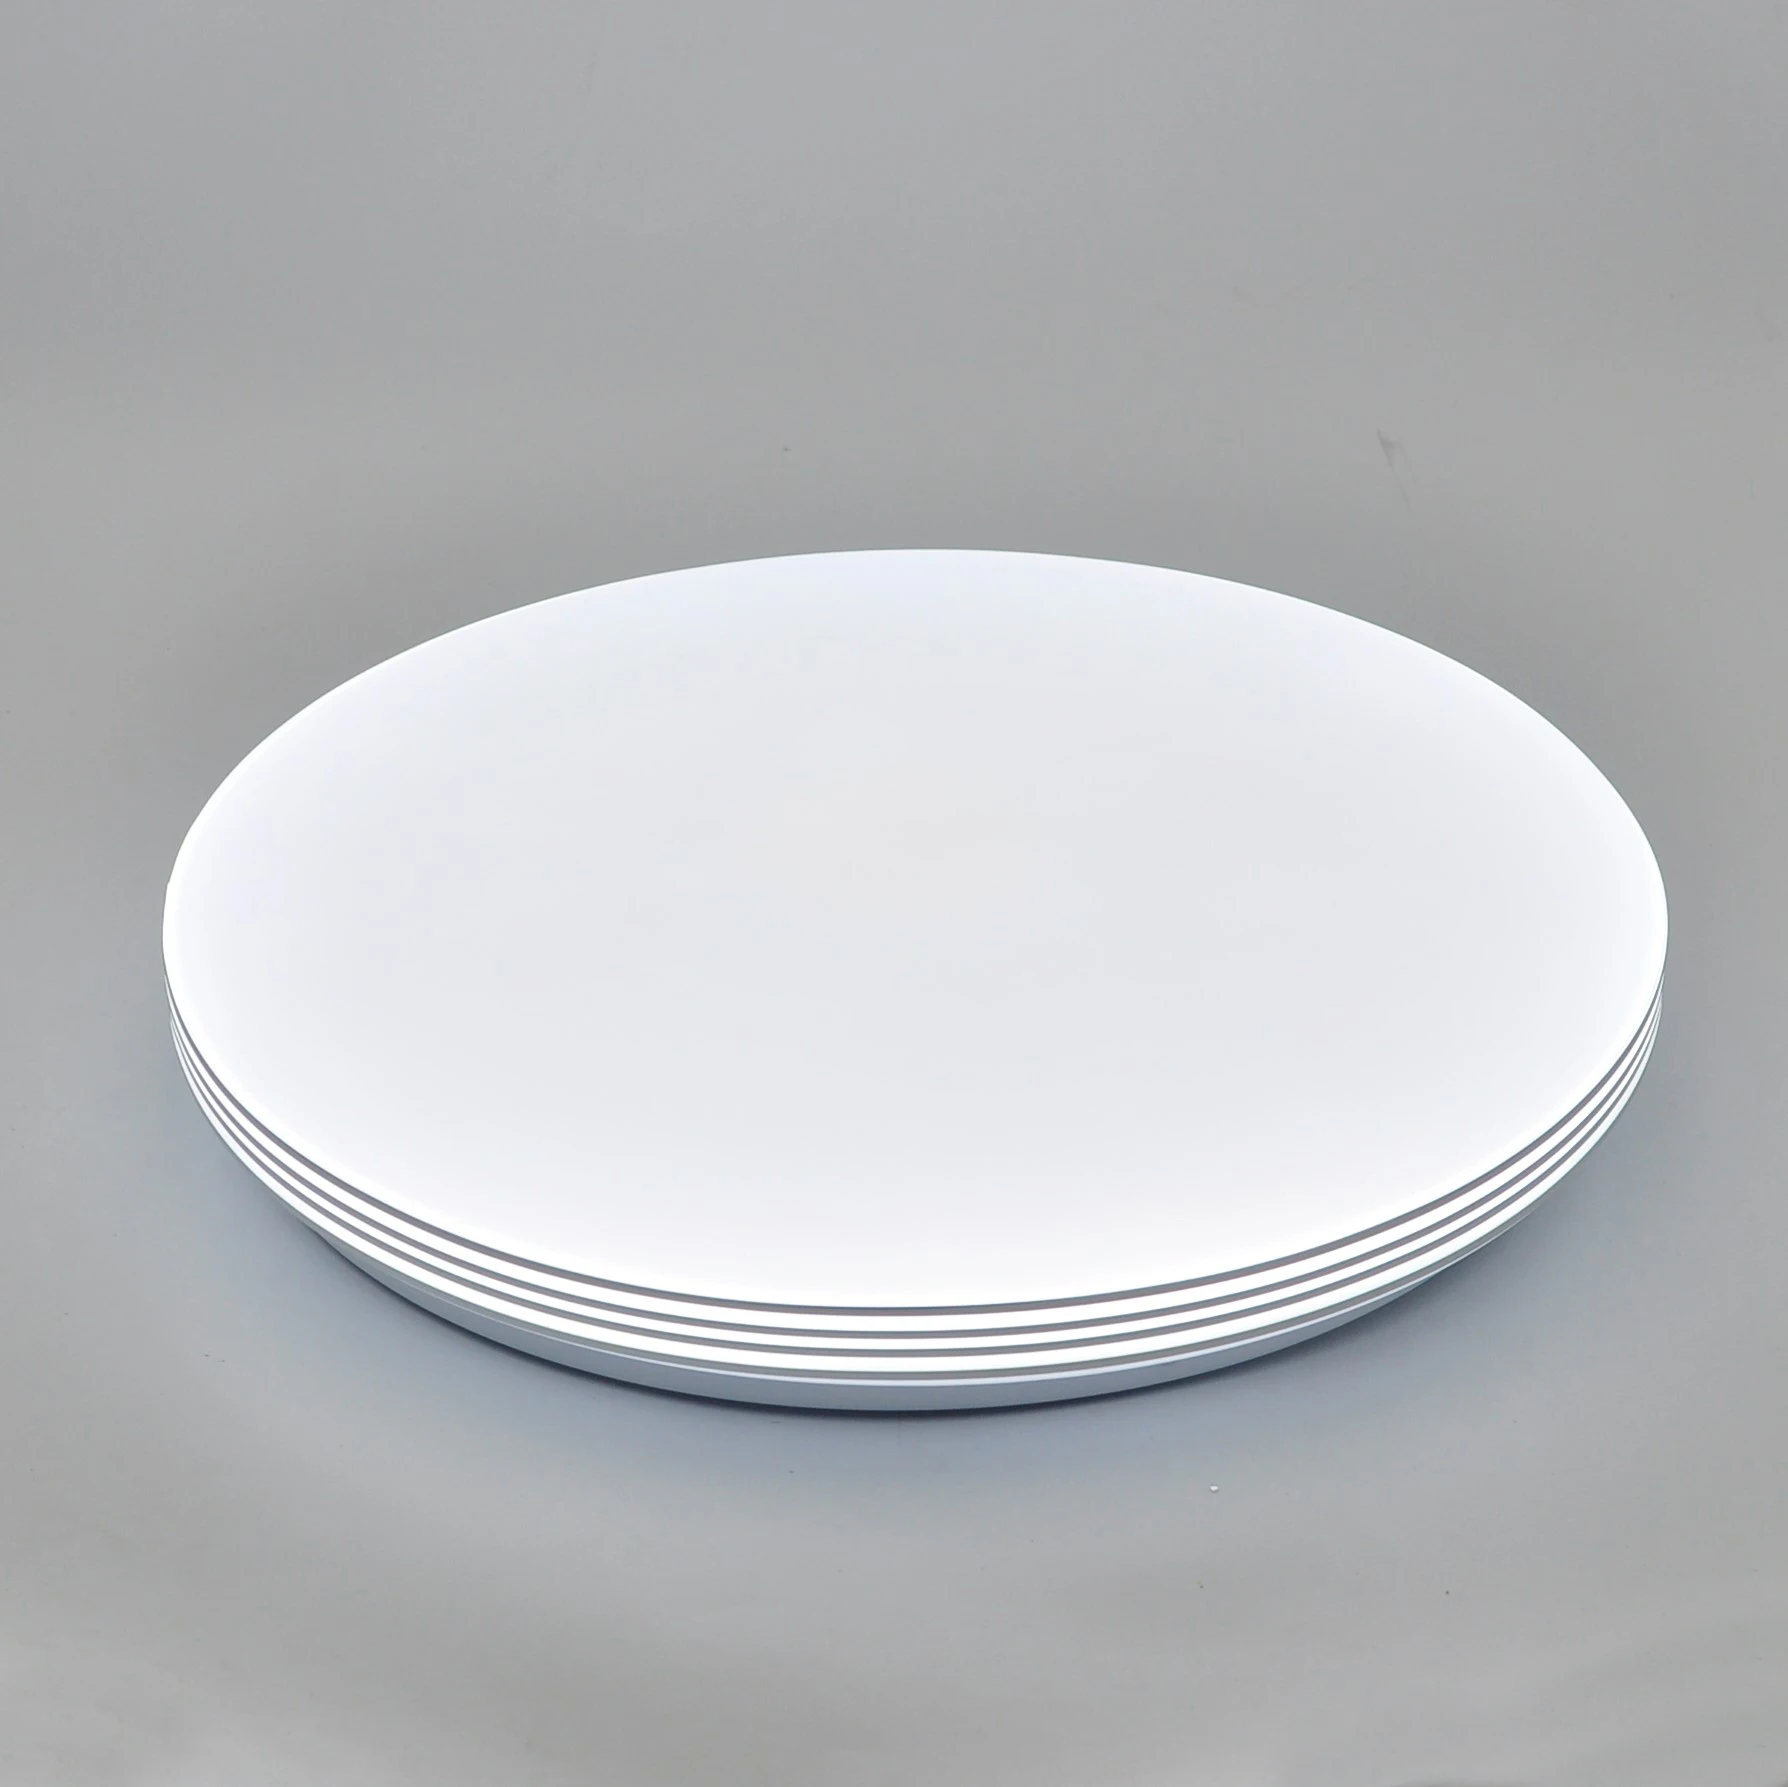 Top selling surface mounted bathroom kitchen office dimmable ceiling light led